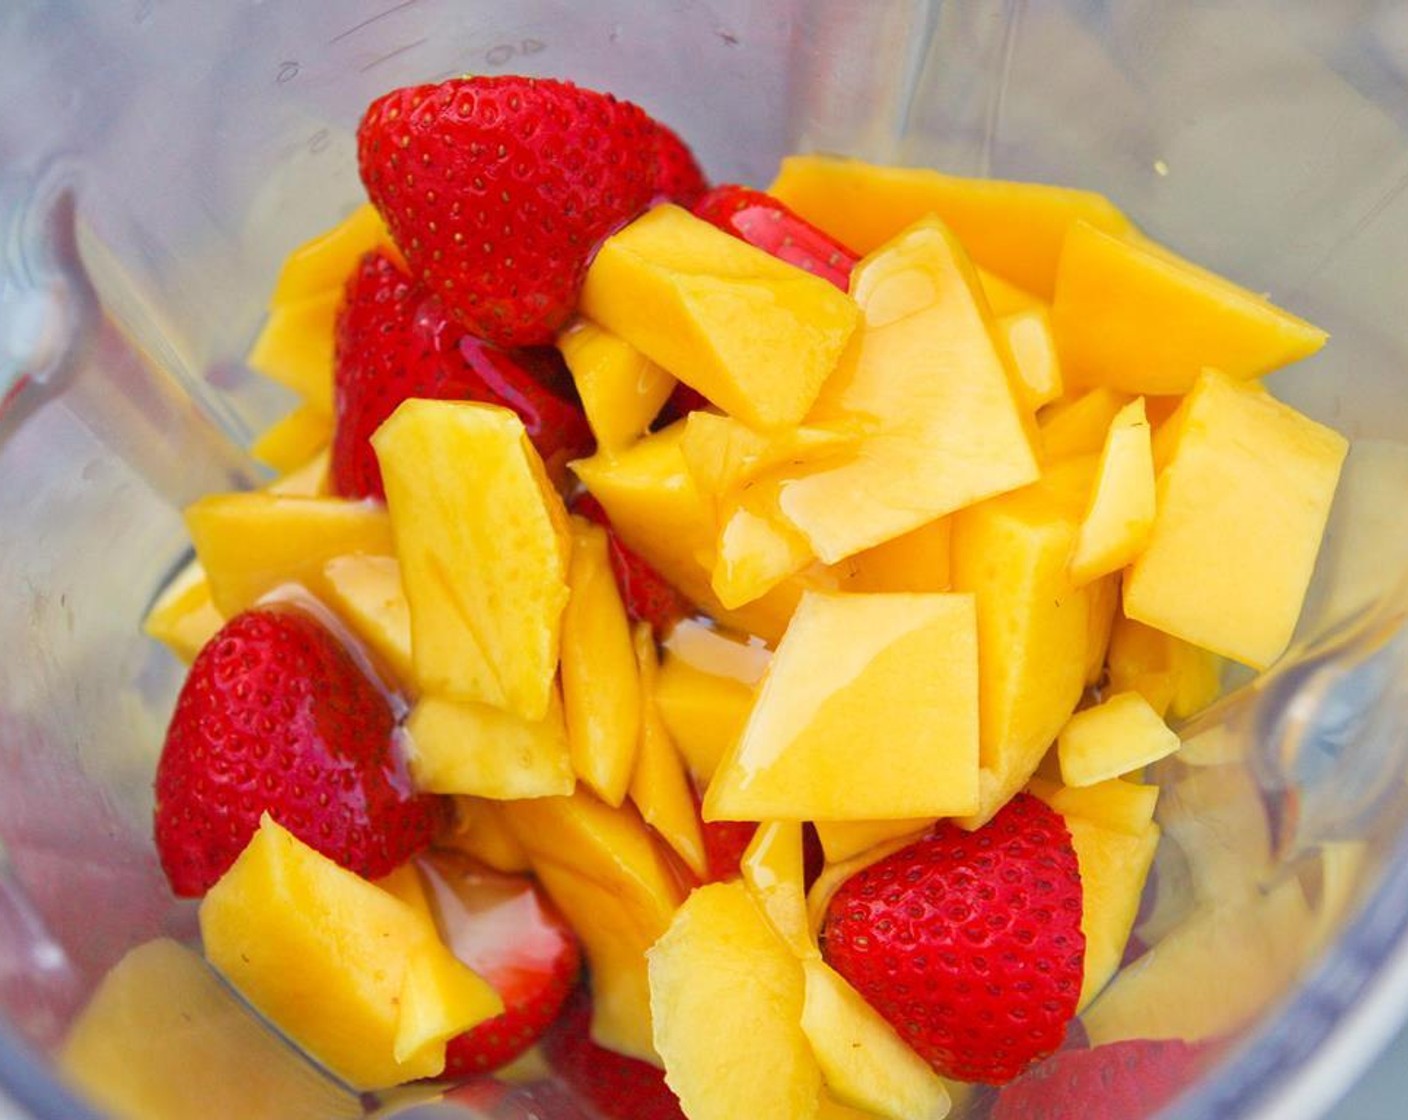 step 3 Place the mango, strawberries, and Honey (to taste) into a blender or food processor and pureé until smooth.